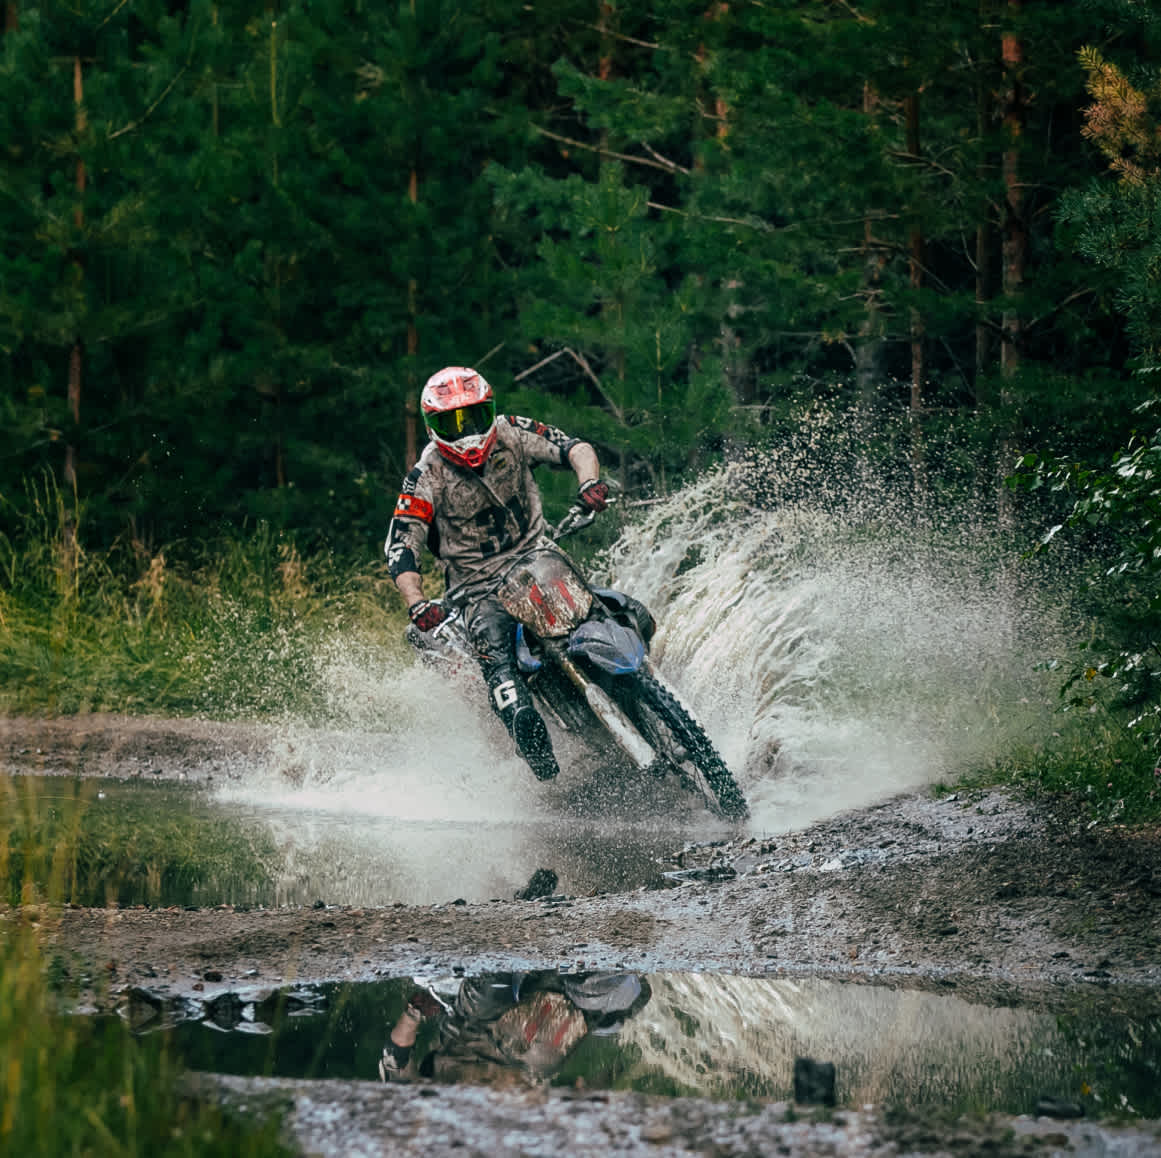 Person on dirtbike riding though a puddle in a forest